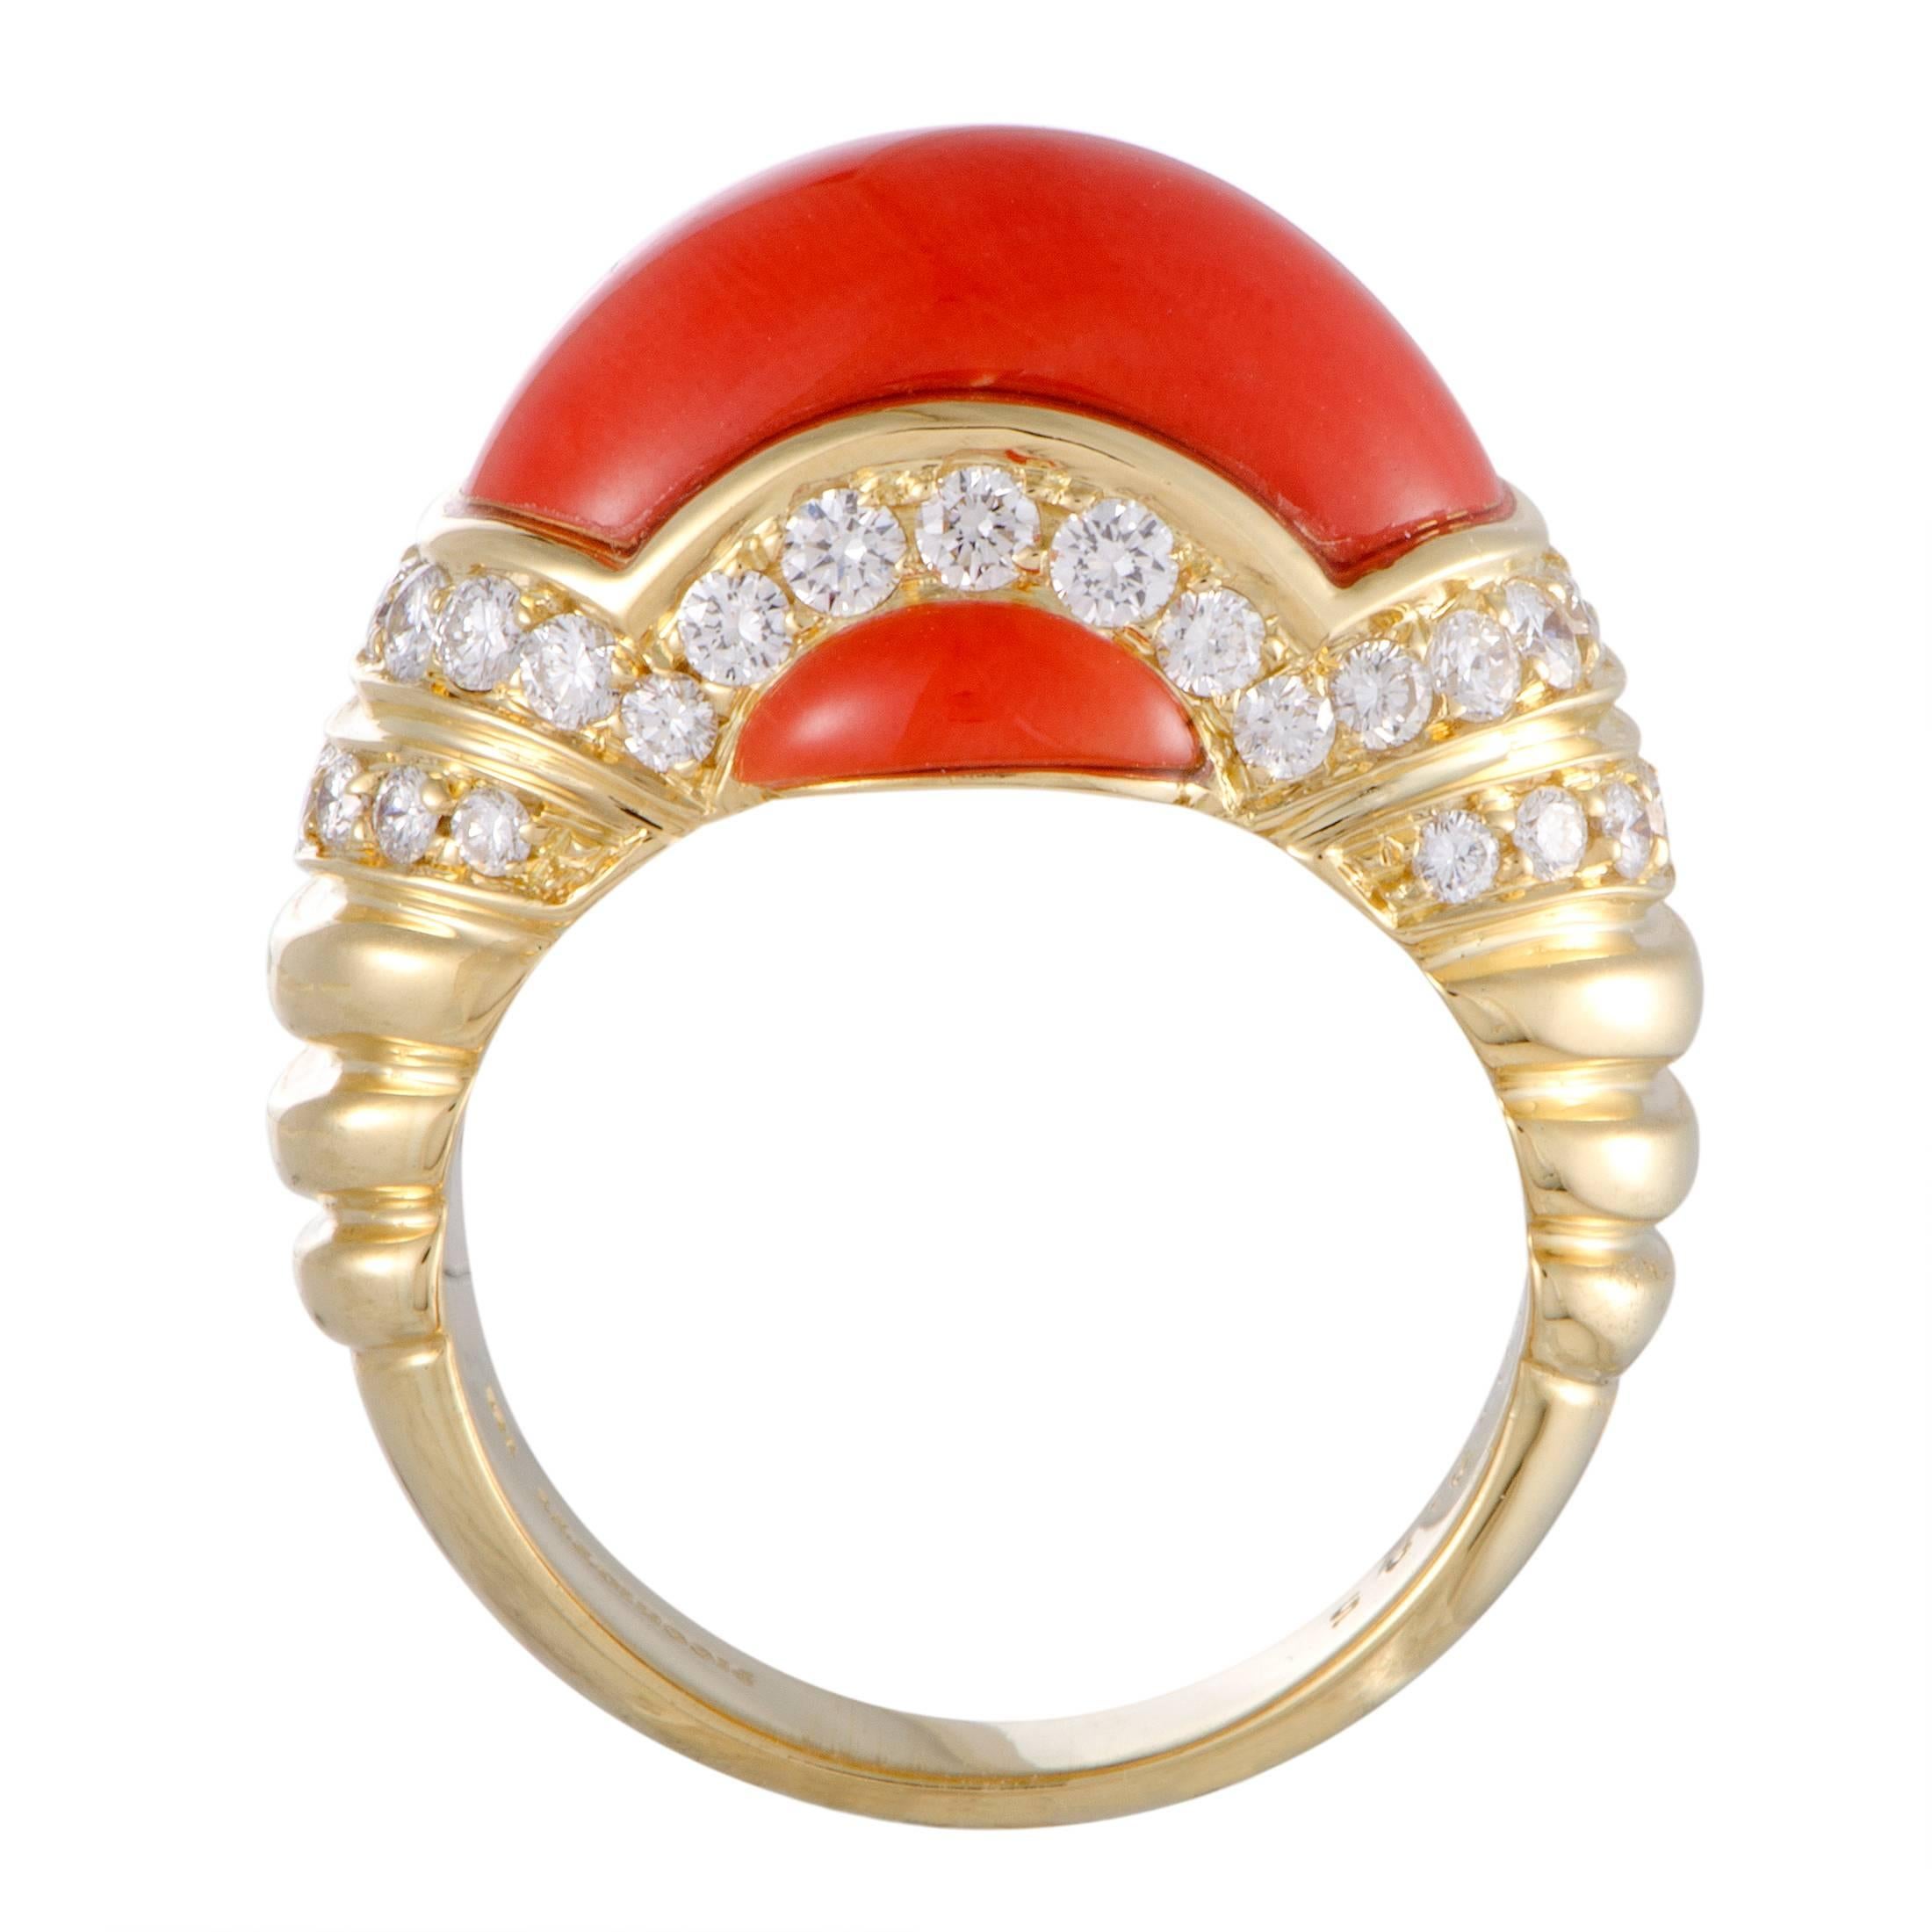 Providing a stunningly fabulous and tastefully complementing backdrop to the astounding color and gracefully smooth shape of the spotless coral stone, the radiant 18K yellow gold is also adorned with 0.85 carats of lustrous F color diamonds of VS1